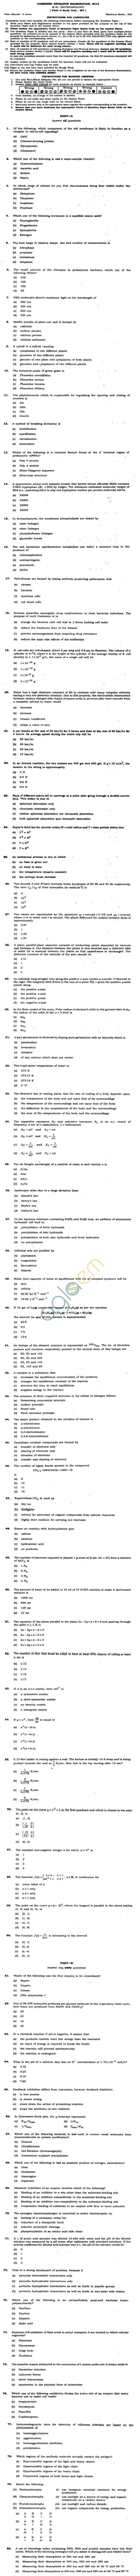 JNU CEEB Question Papers 2012 M.Sc. - Biotechnology